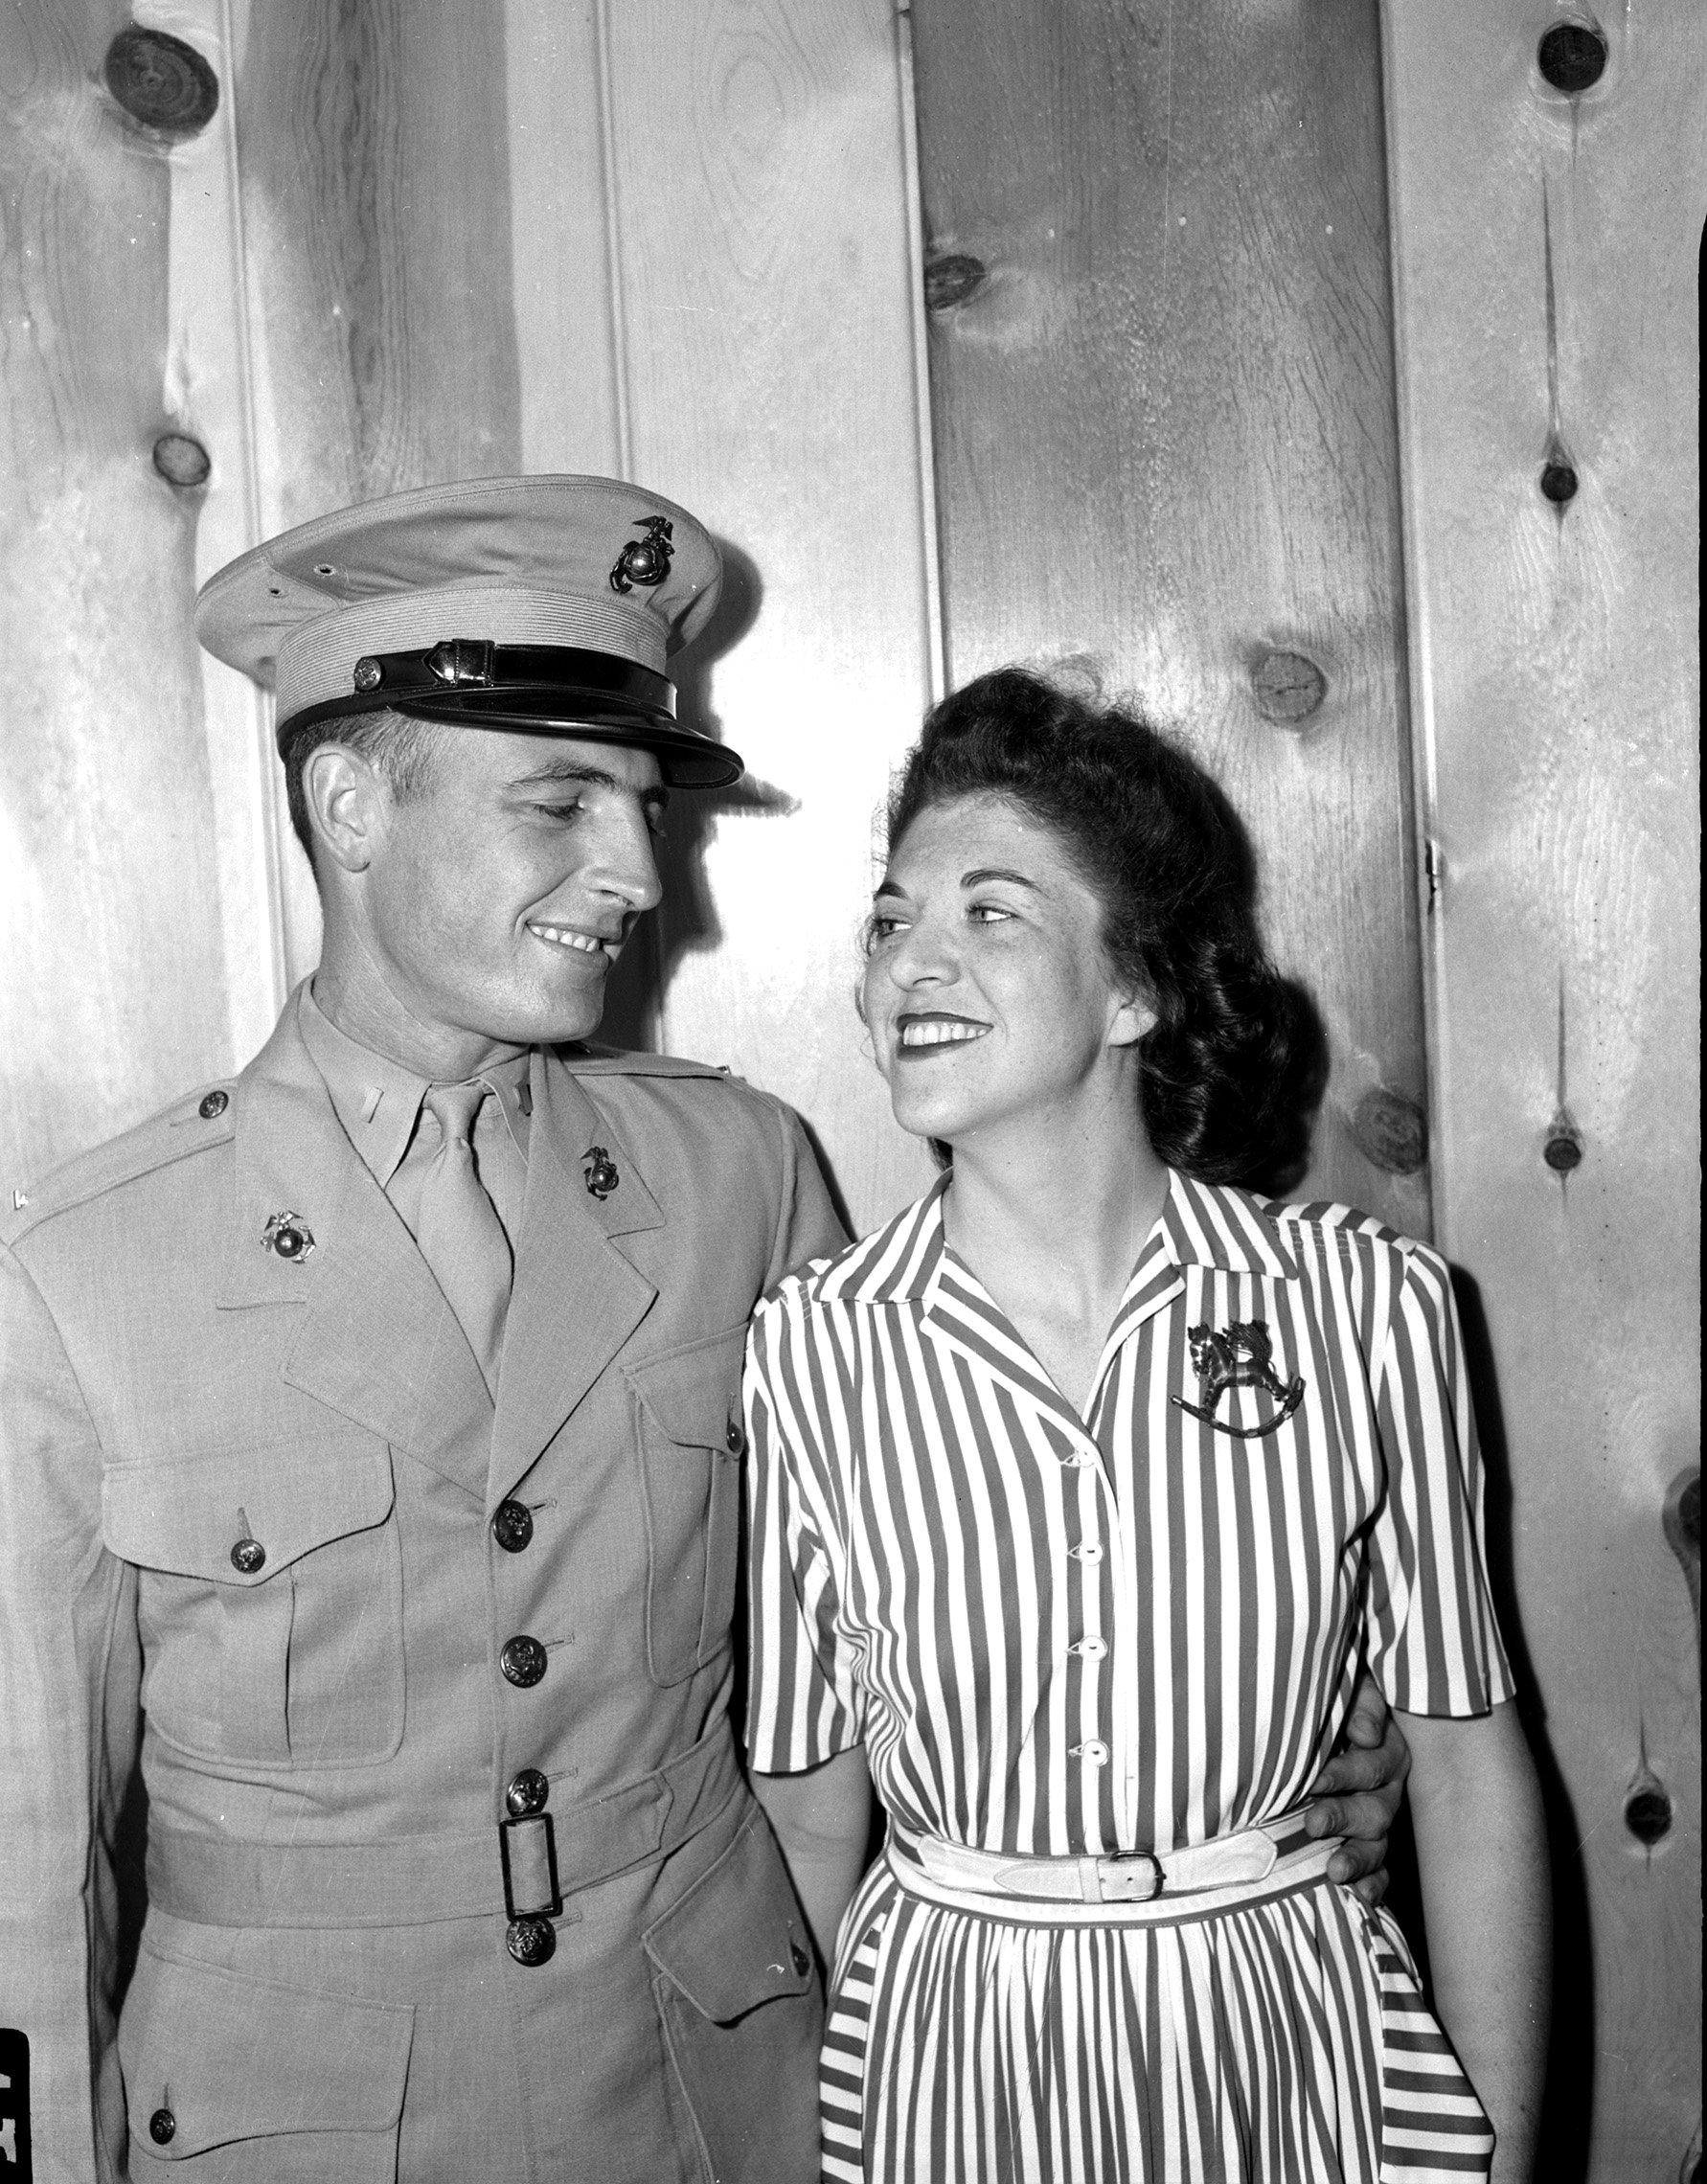 Lieutenant Robert G. Boydstun and his wife, Jeanne Mathis. He is wearing WWII Marine Corps uniform, and she is wearing a striped shirtdress with a rocking horse pin. 